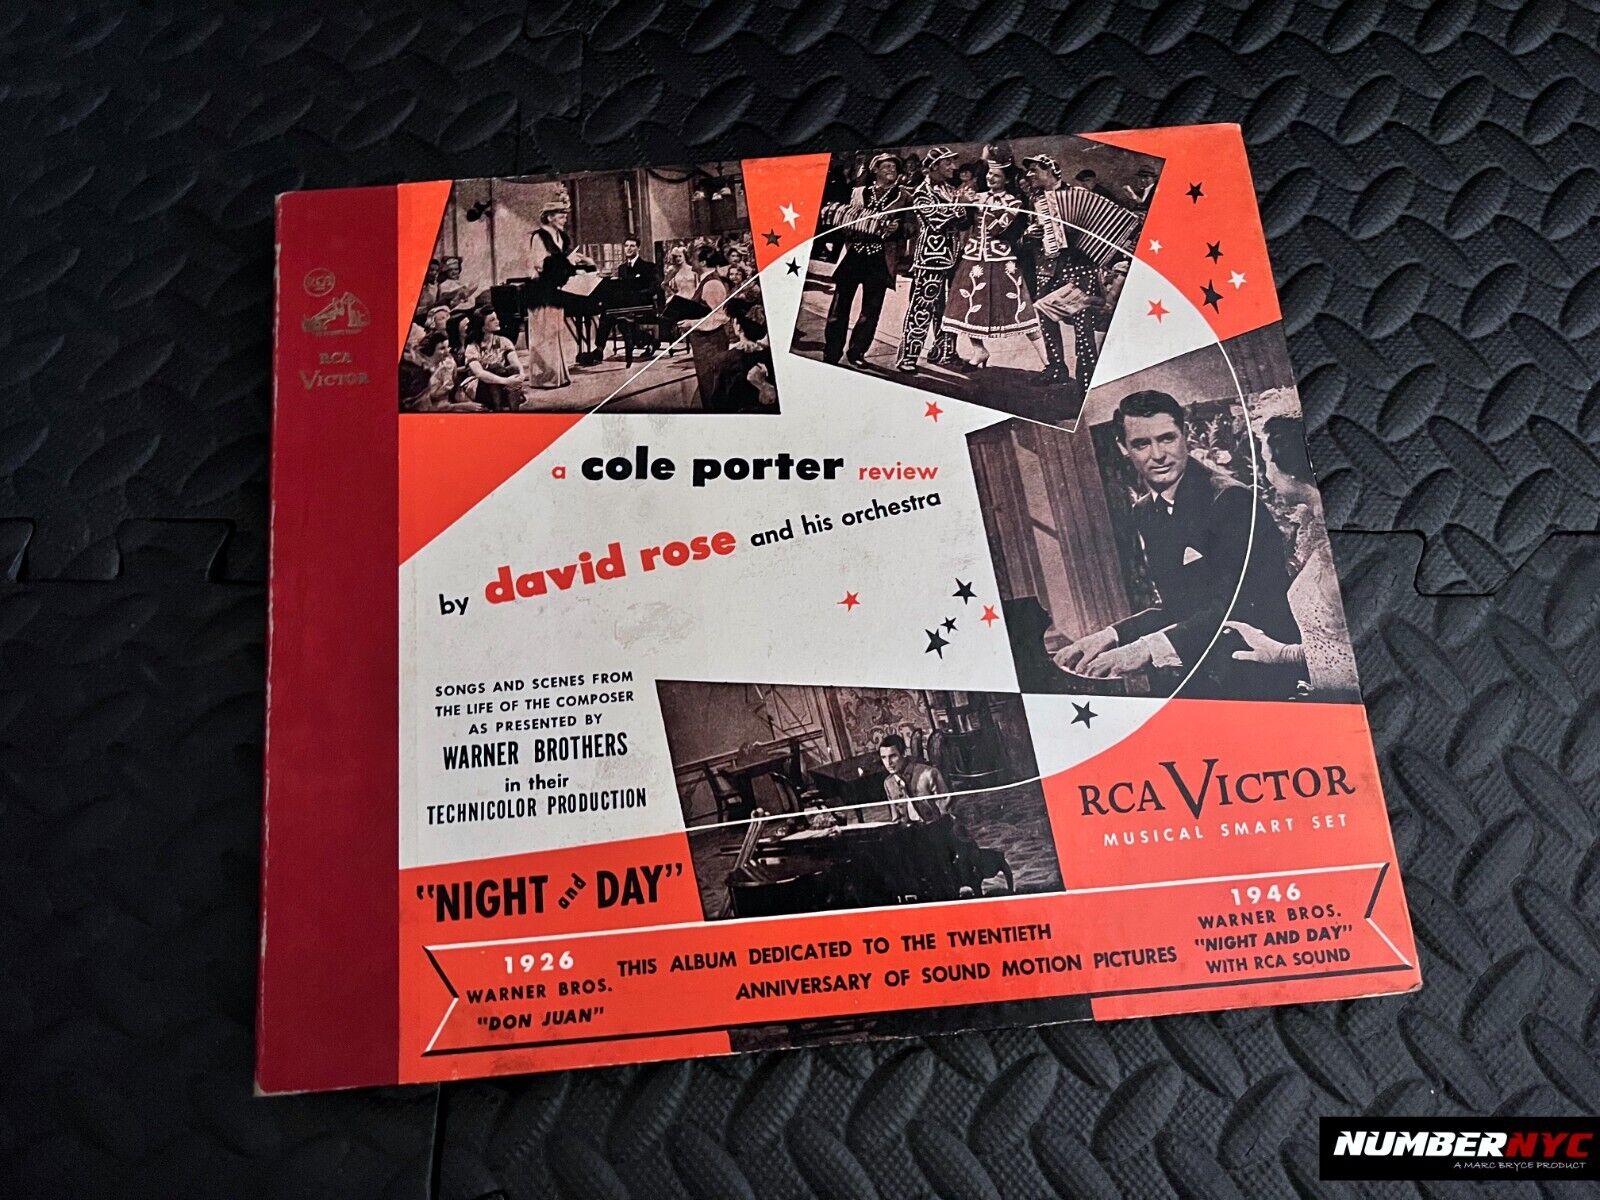 A Cole Porter Review by David Rose & His Orchestra RED RCA Victor Record 78 RPM